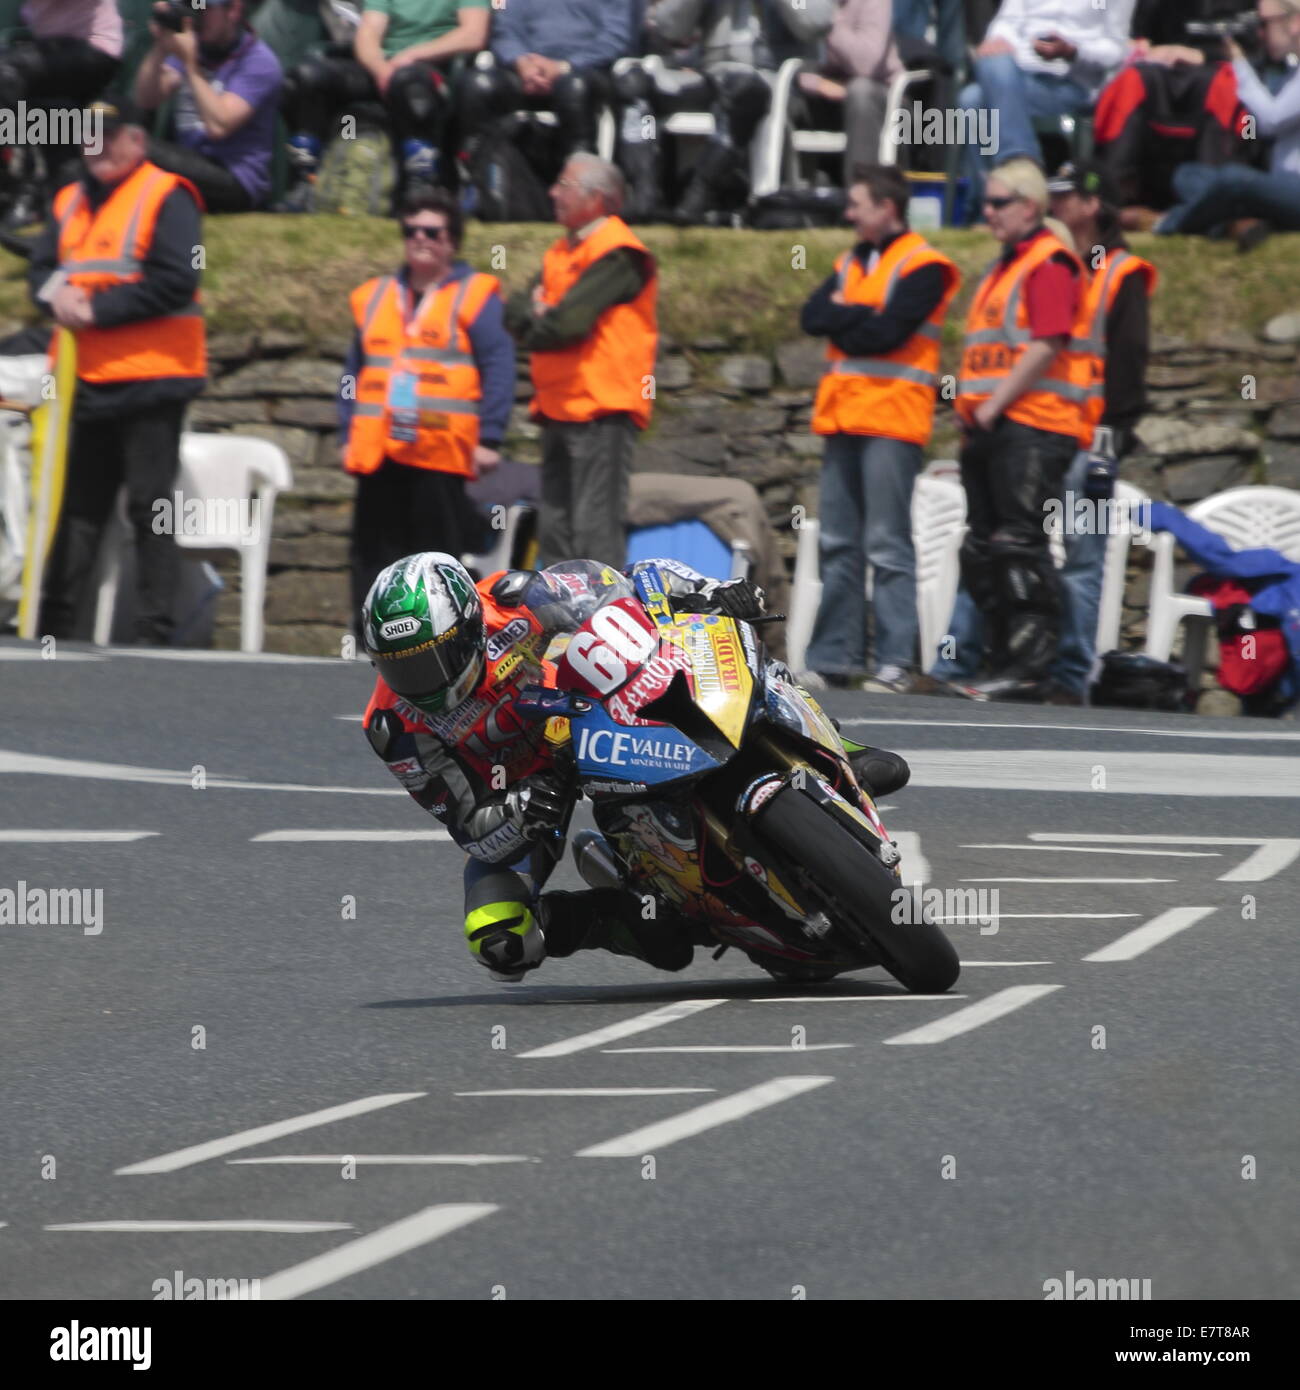 Peter Hickman riding his  Ice Valley superstock BMW motorcycle, during the 2014 Isle of Man TT. Stock Photo